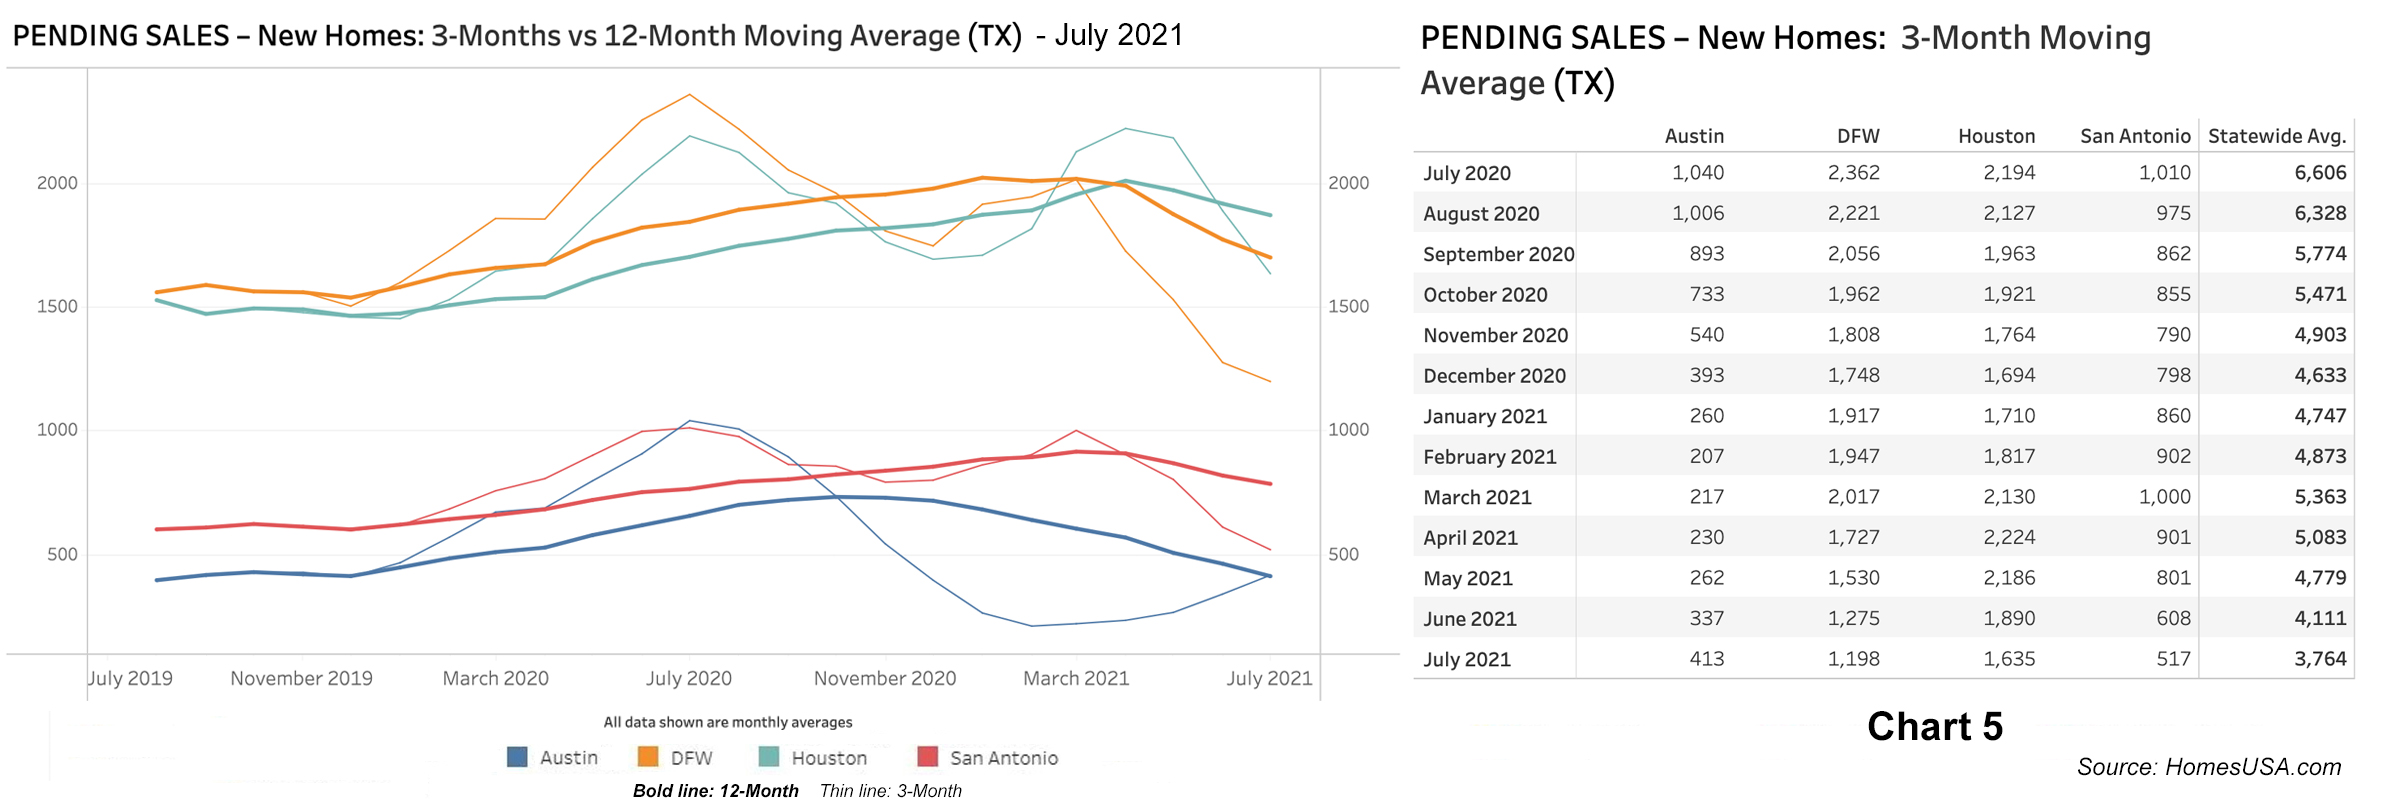 Chart 5: Texas Pending New Homes Sales - July 2021